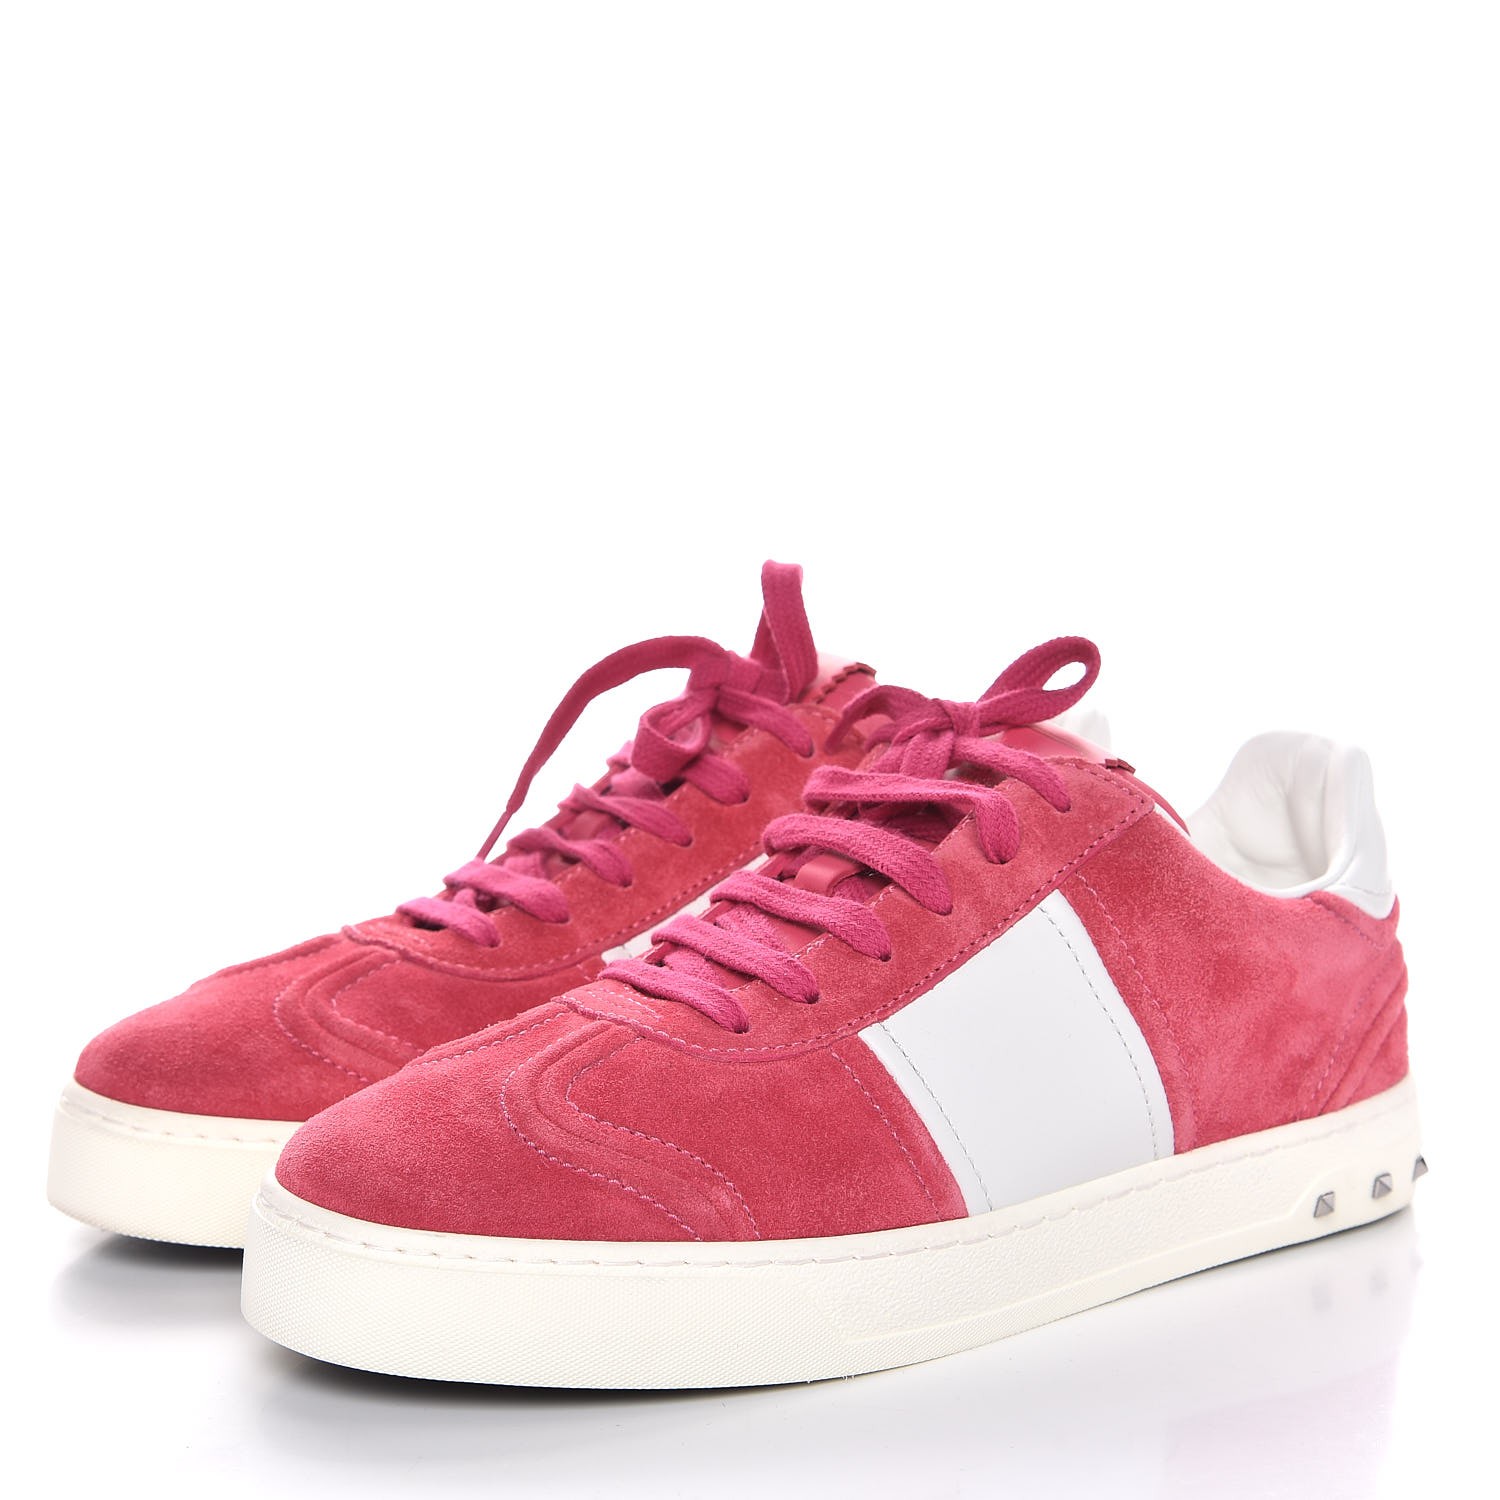 VALENTINO Suede Flycrew Sneakers 39 Pink 300342 | FASHIONPHILE